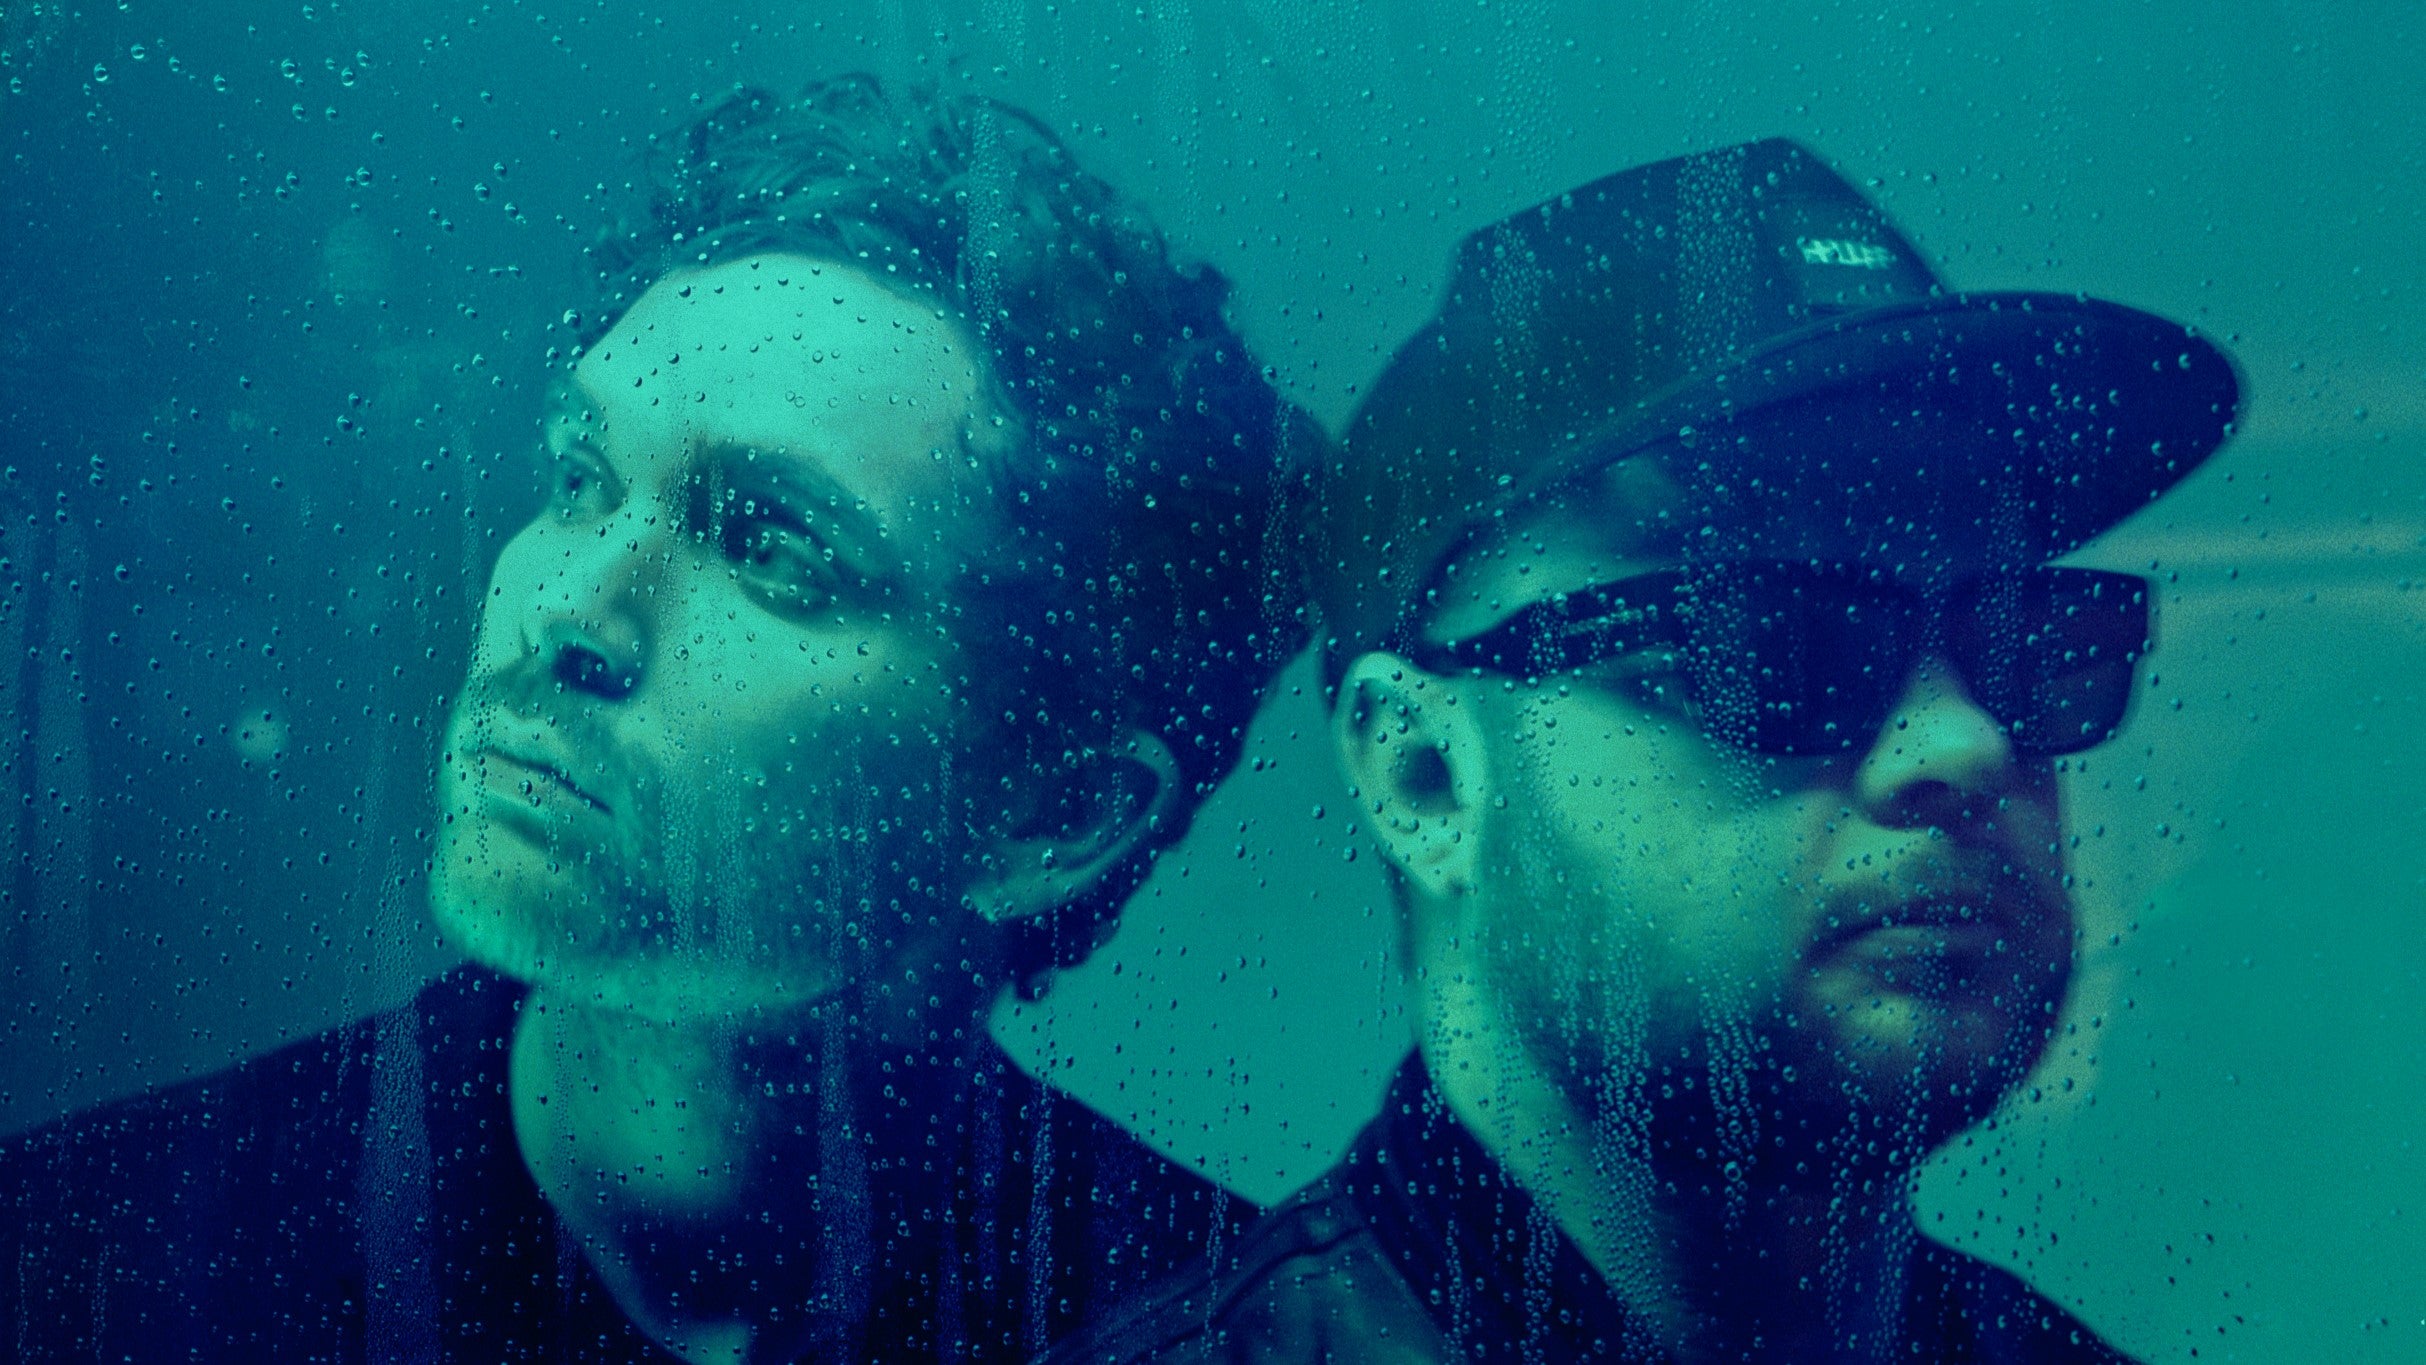 Royal Blood pre-sale password for real tickets in Vancouver